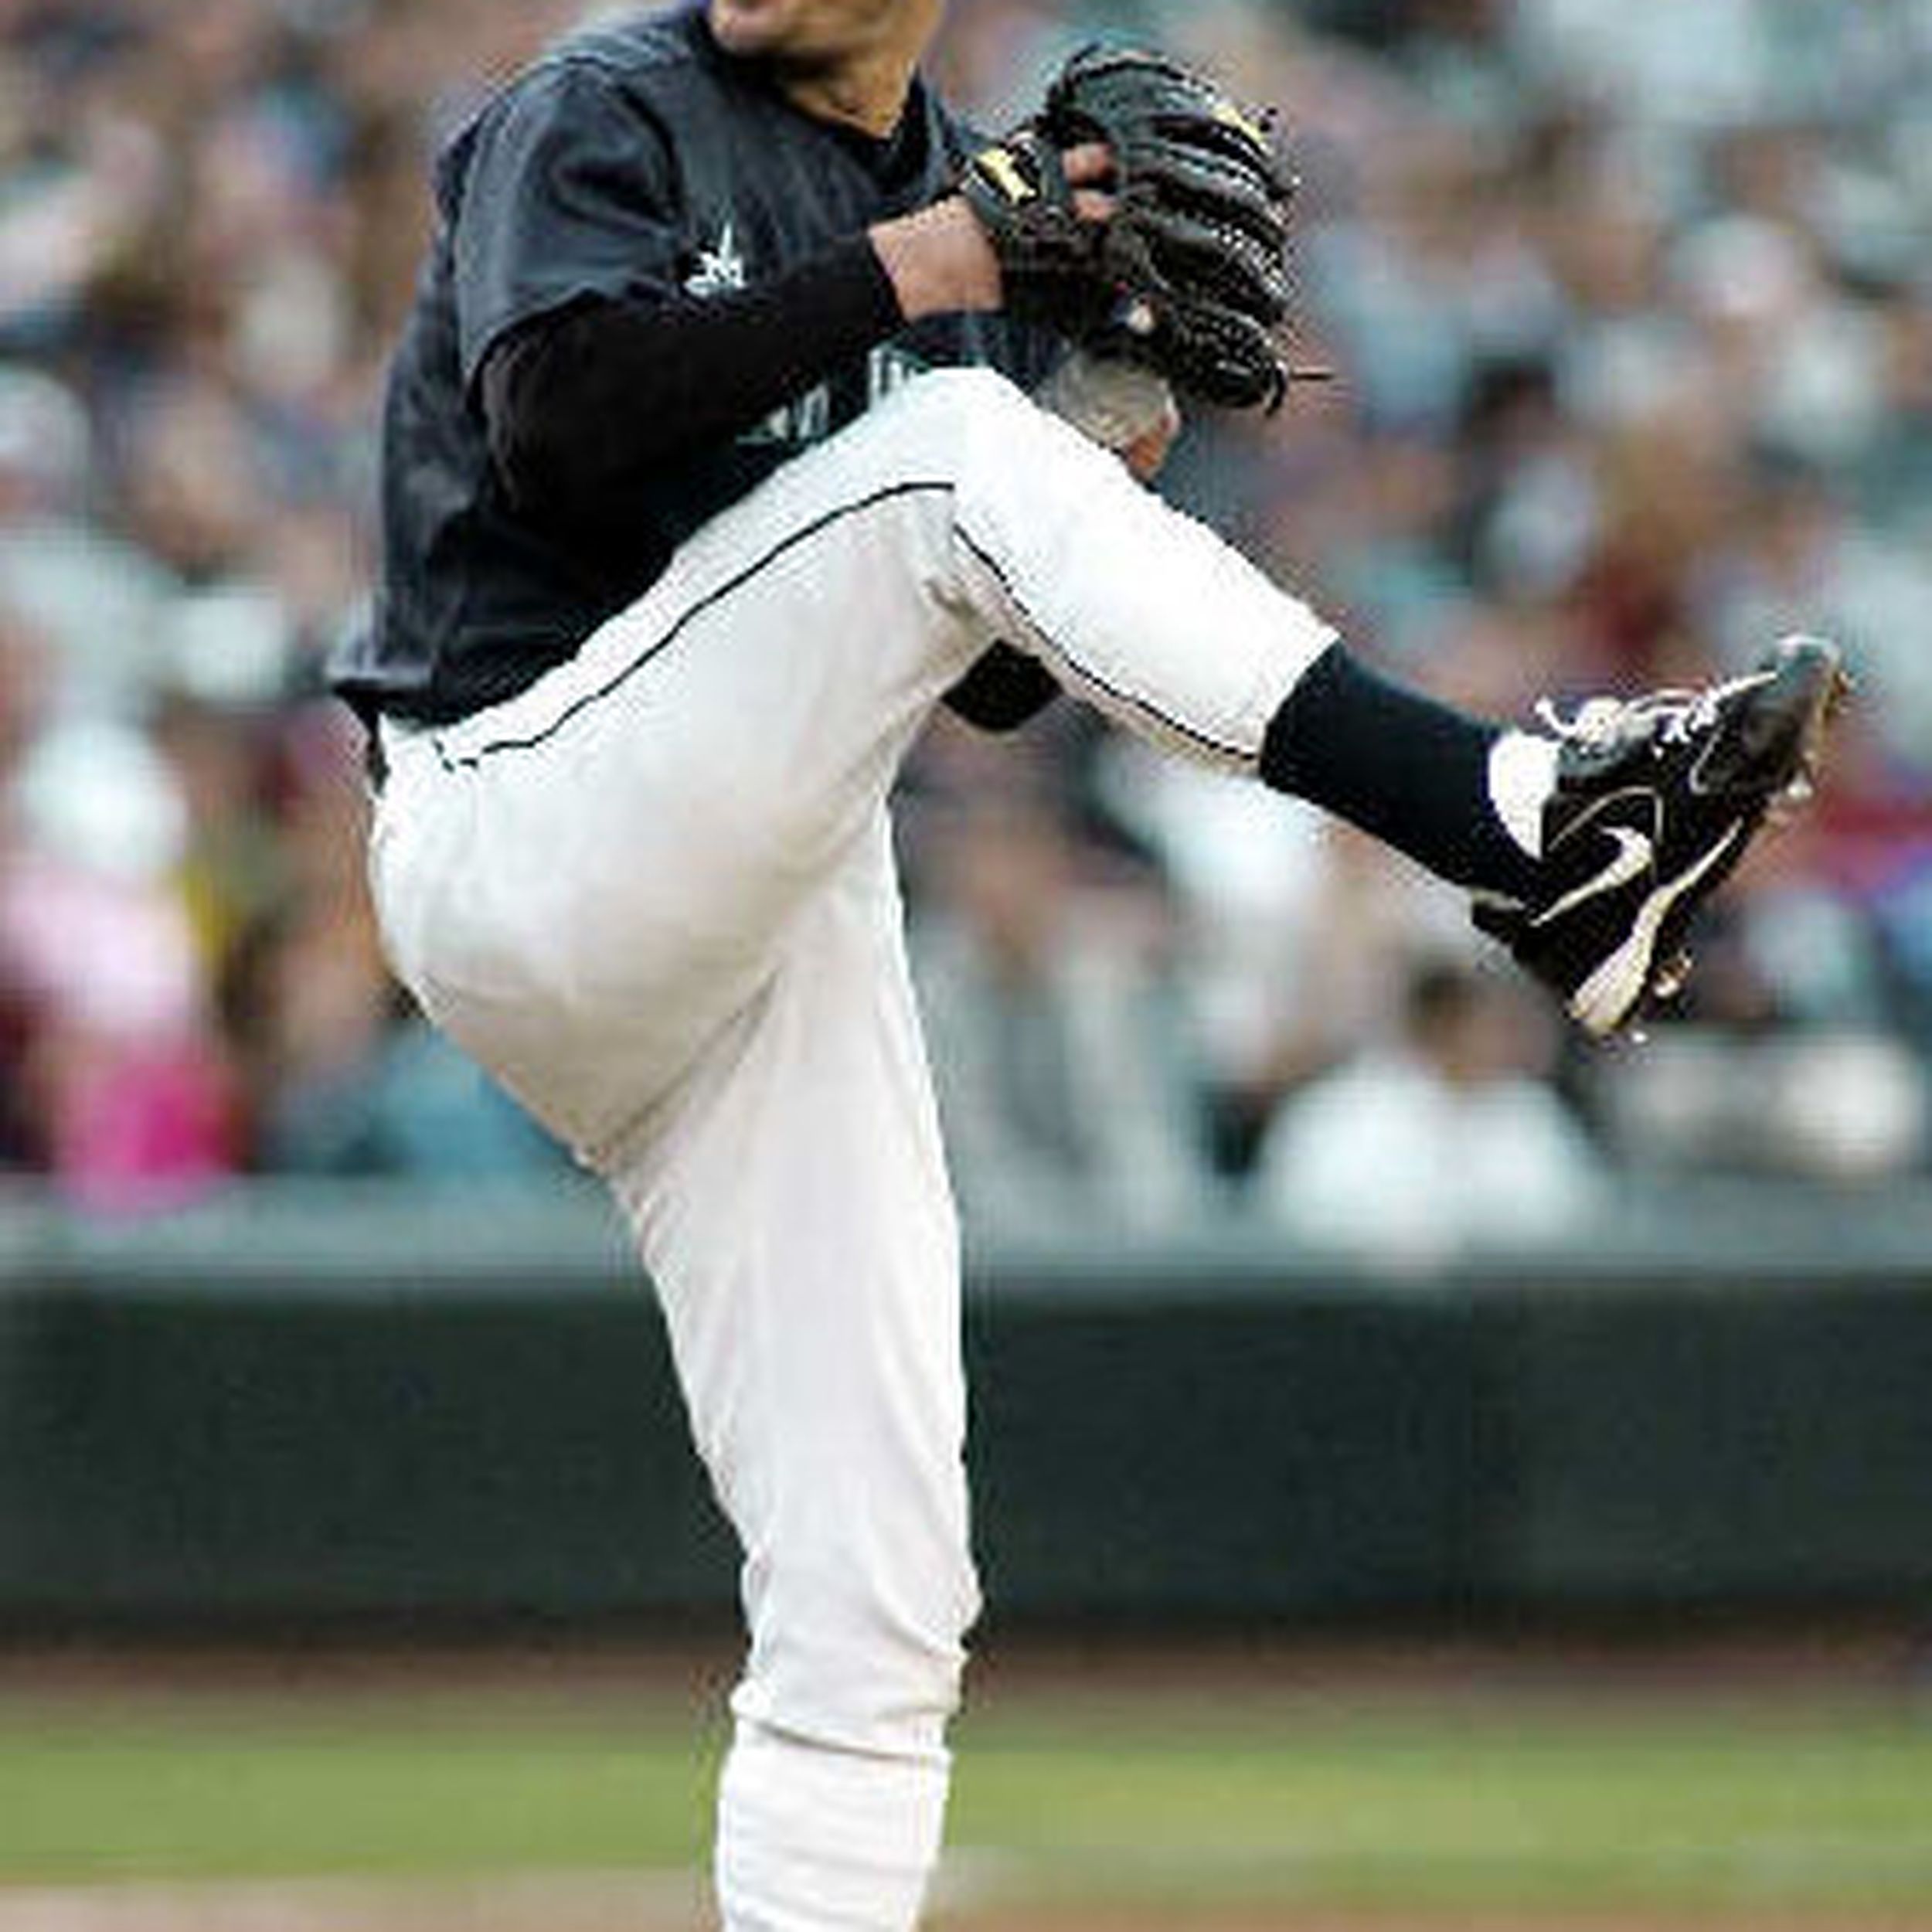 Jamie Moyer's singular career gets a fitting tribute from Mariners